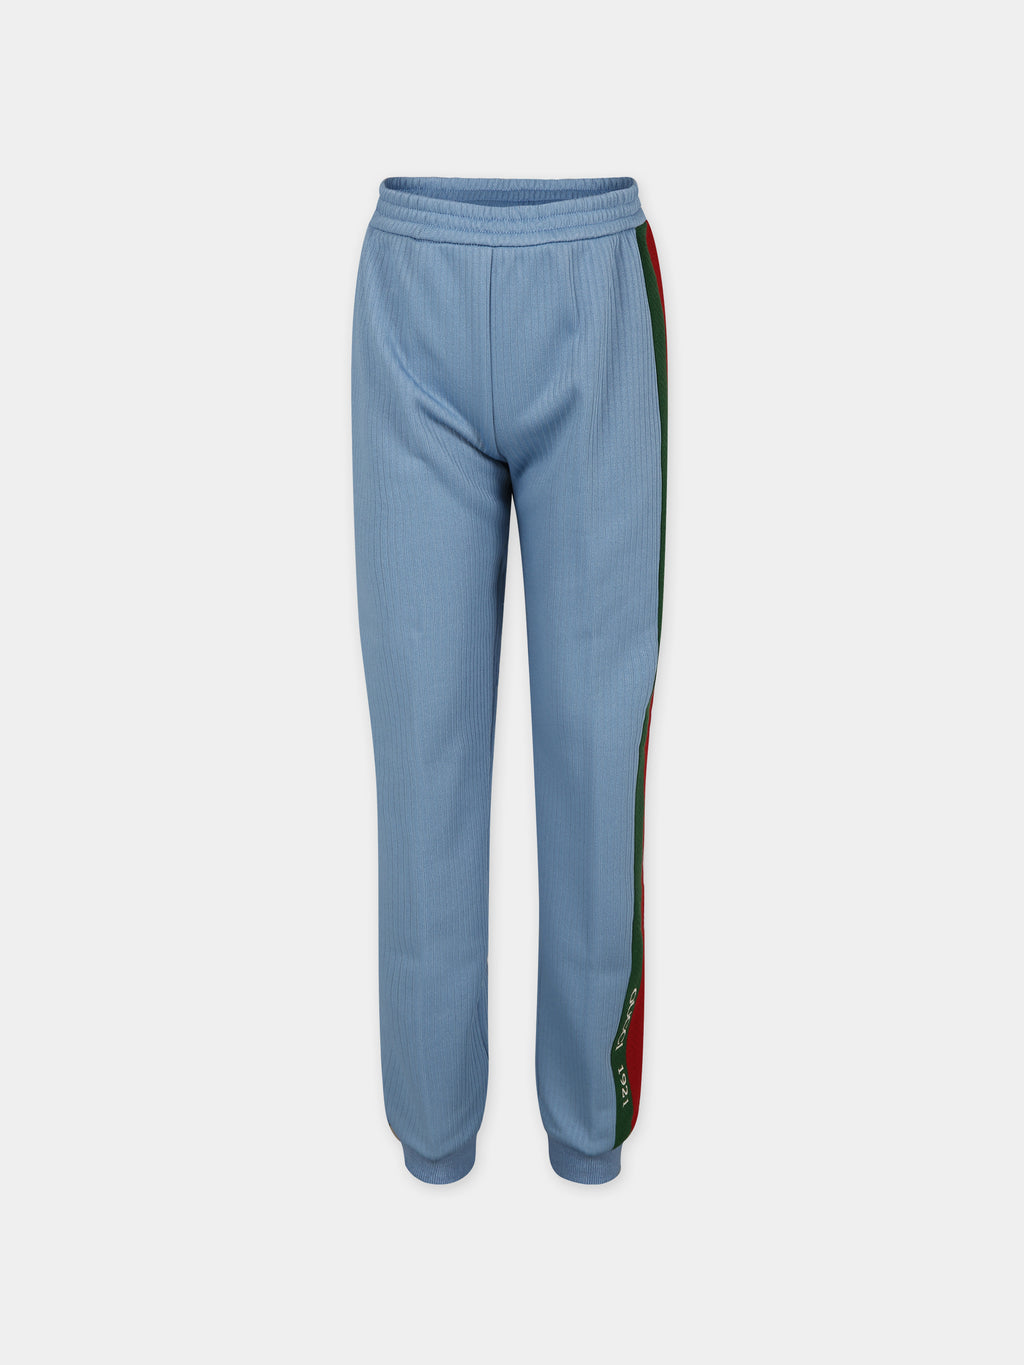 Light blue trousers for kids with Web detail